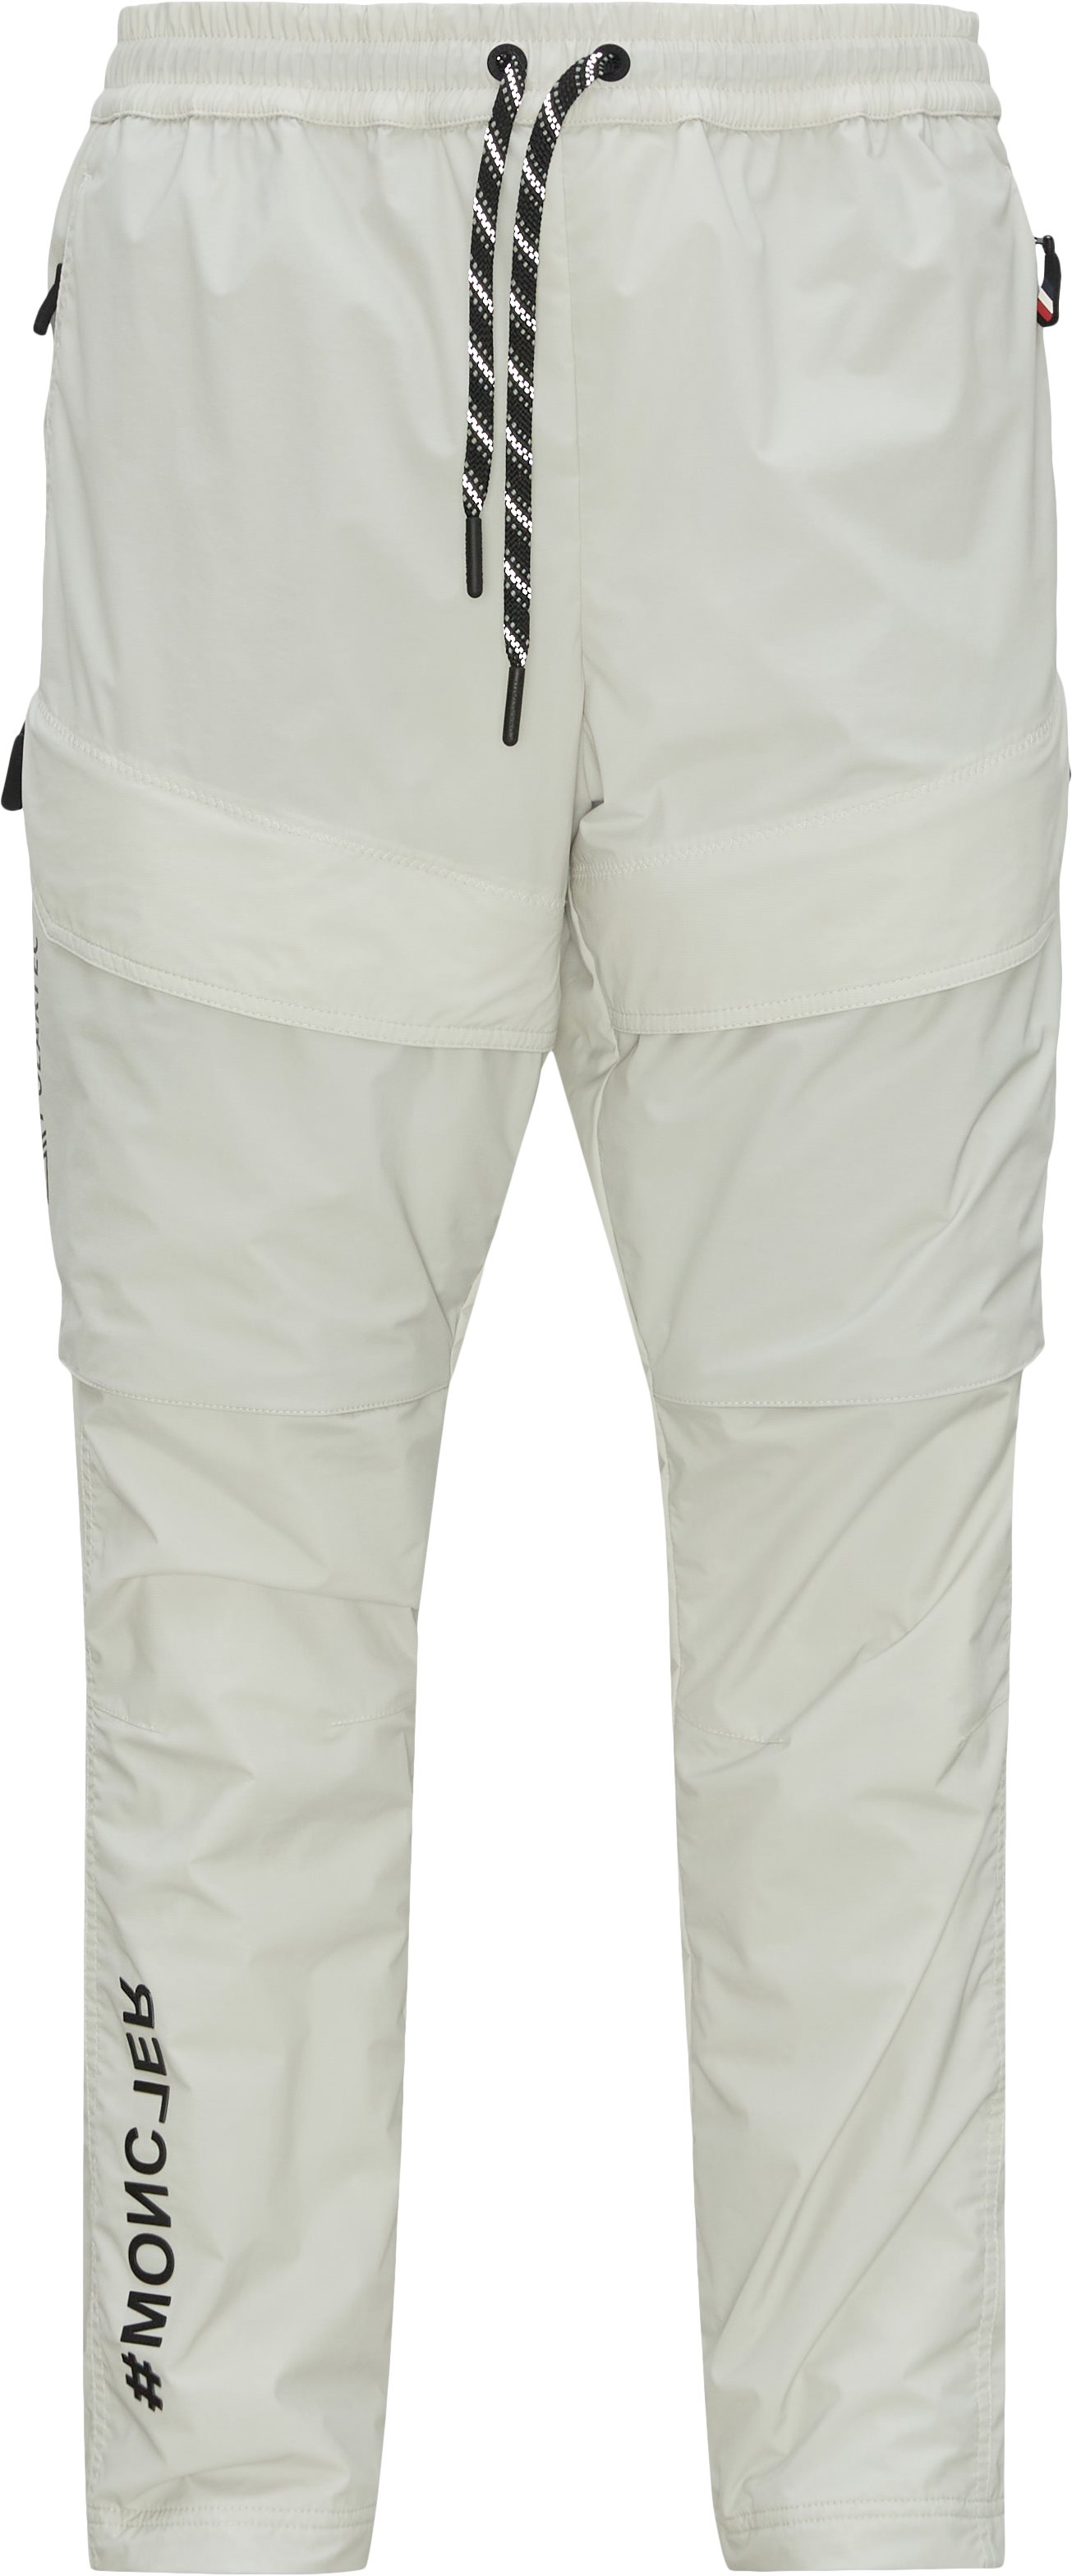 Moncler Grenoble Trousers 2A00004 539M3  Grey